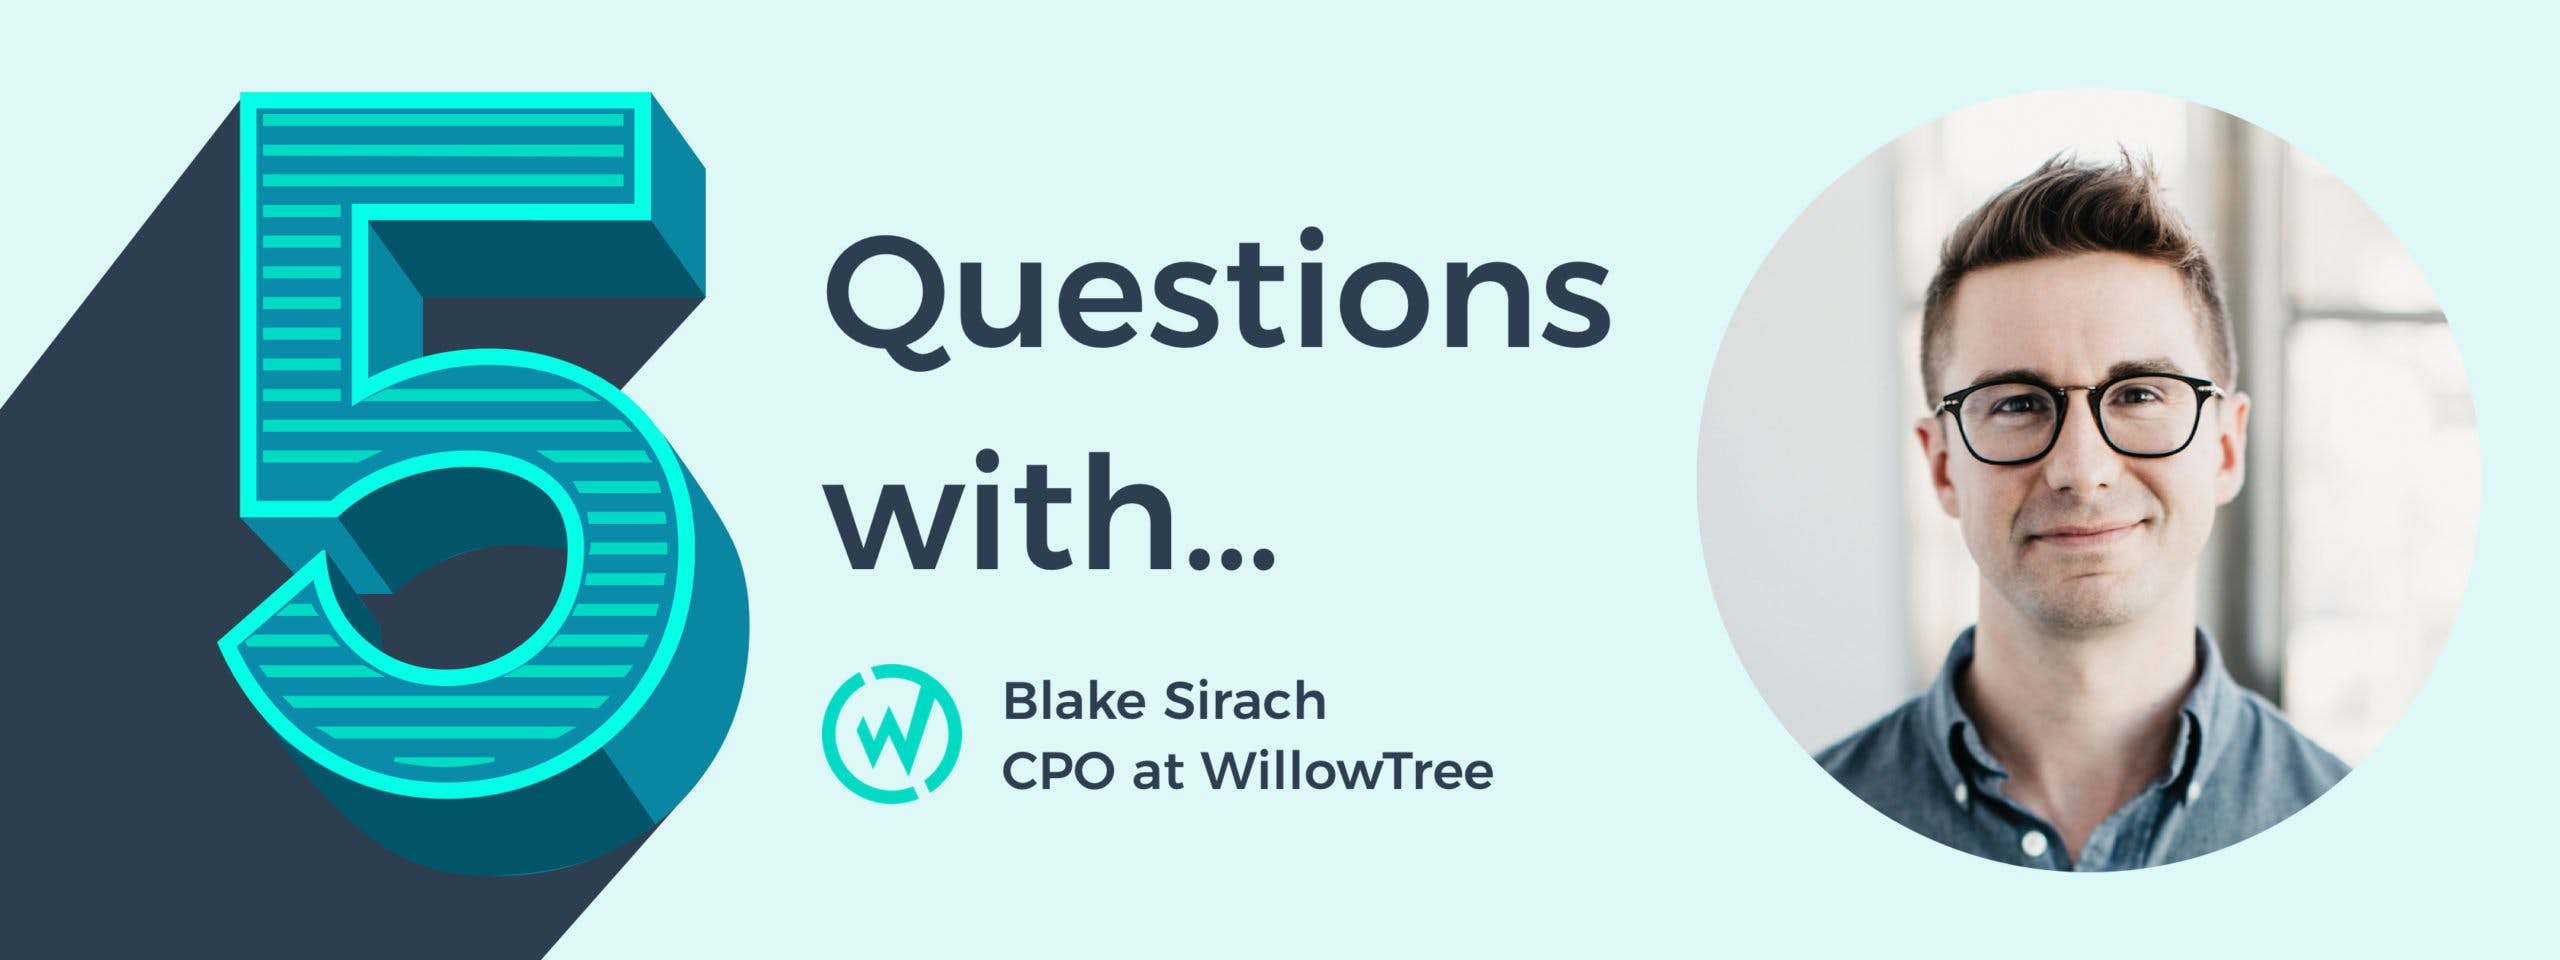 5 Questions with Blake Sirach, CPO at WillowTree